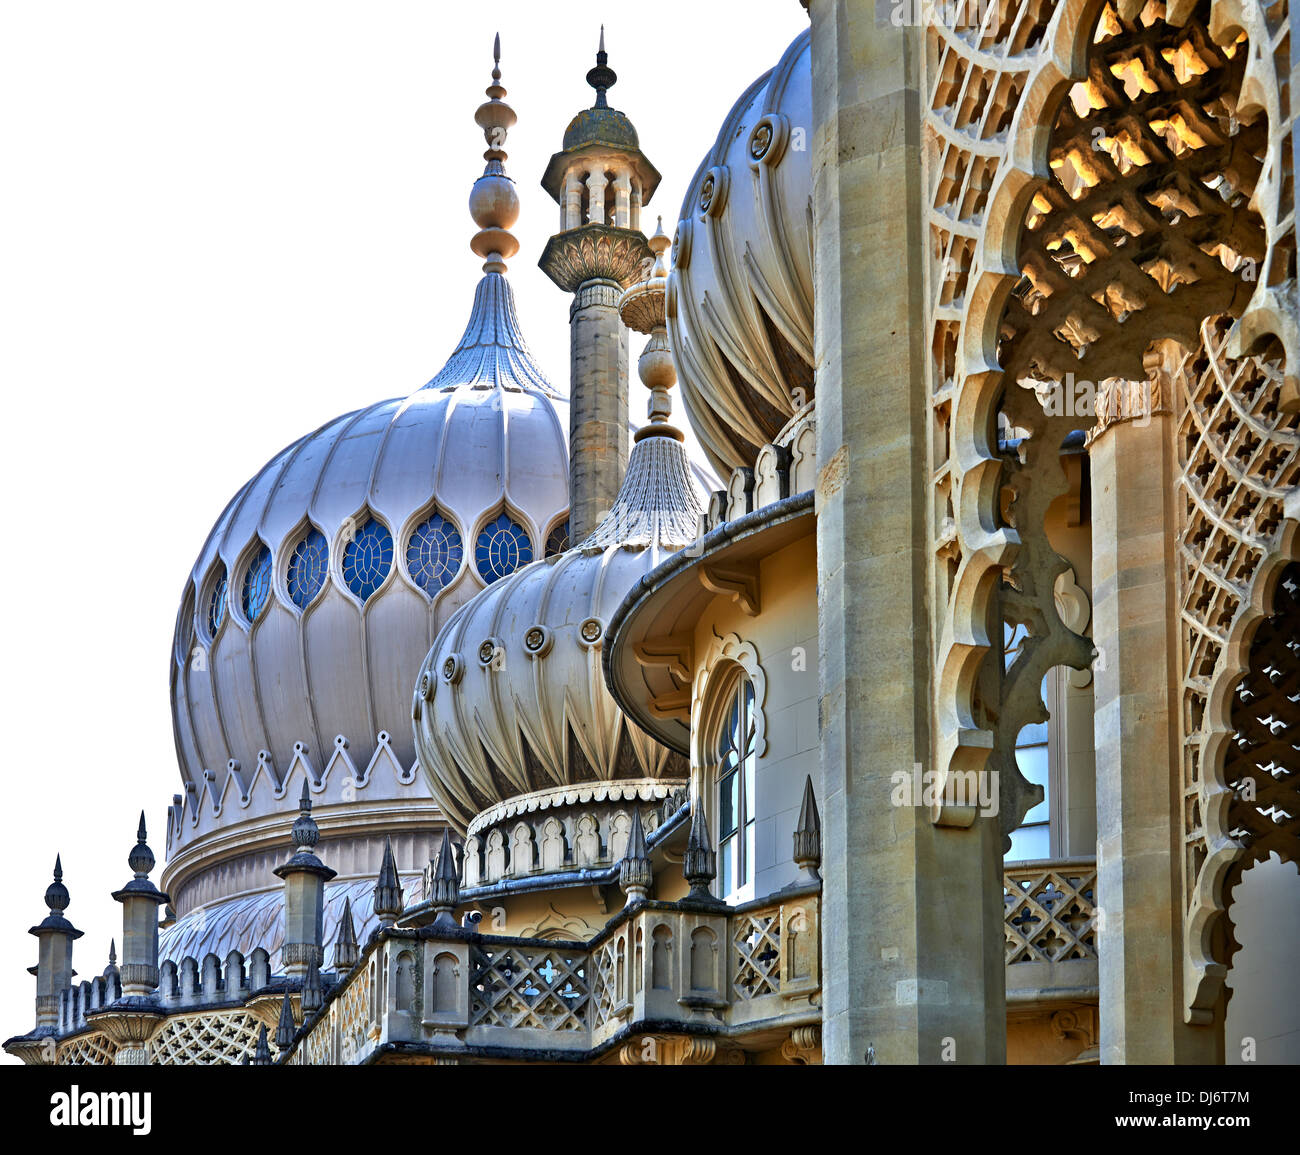 The Royal Pavilion is a former royal residence located in Brighton, England, United Kingdom. Stock Photo